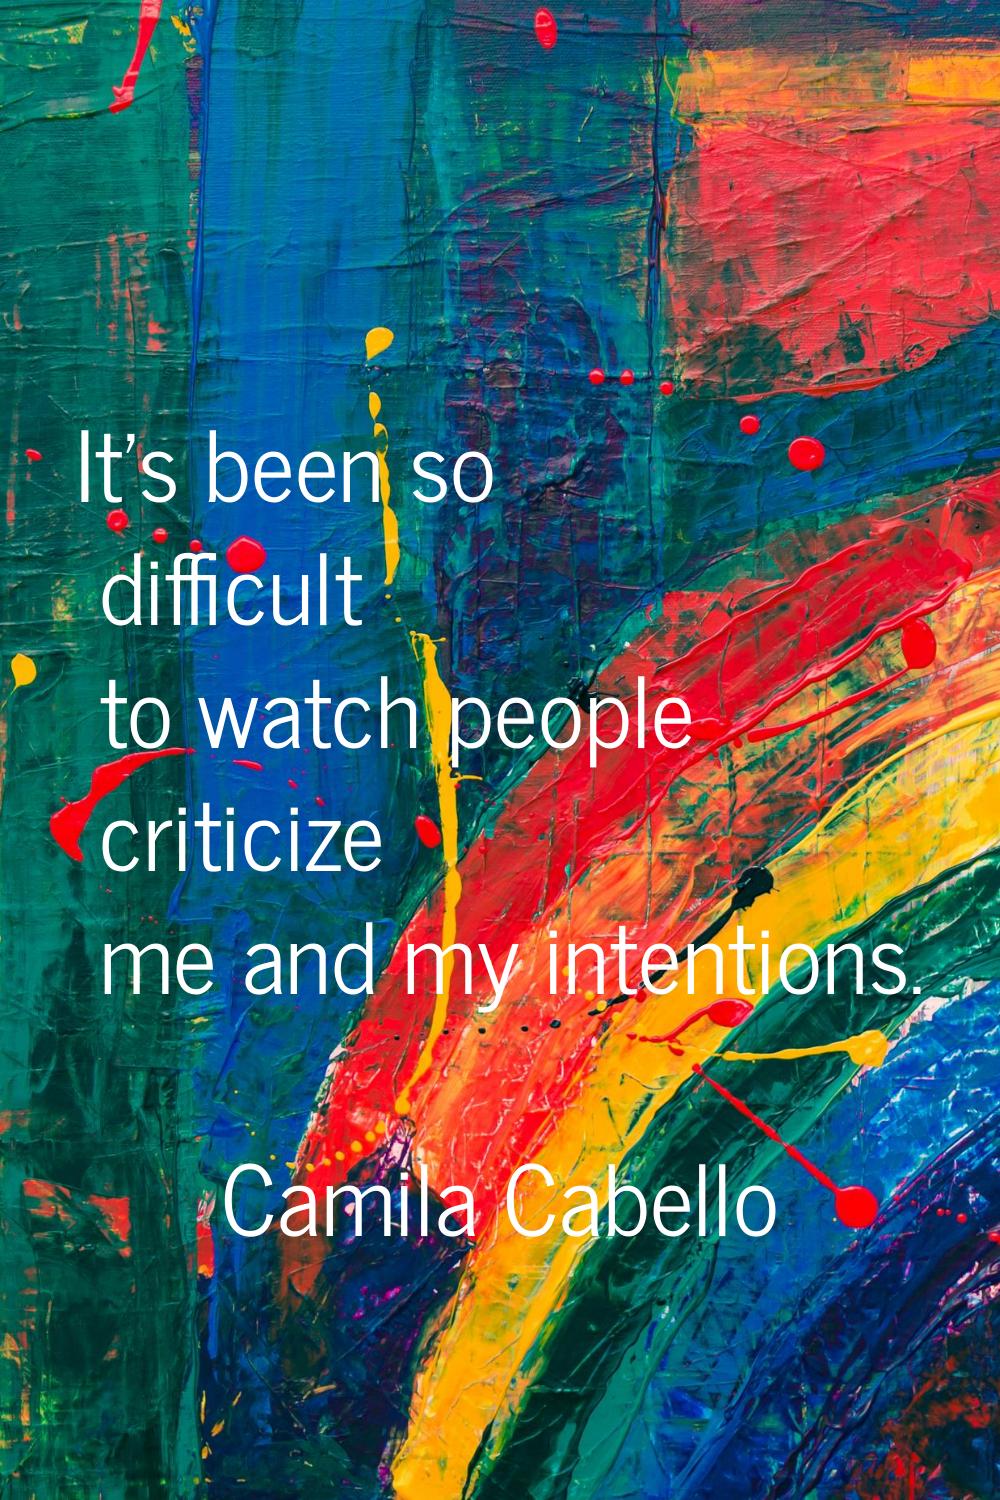 It's been so difficult to watch people criticize me and my intentions.